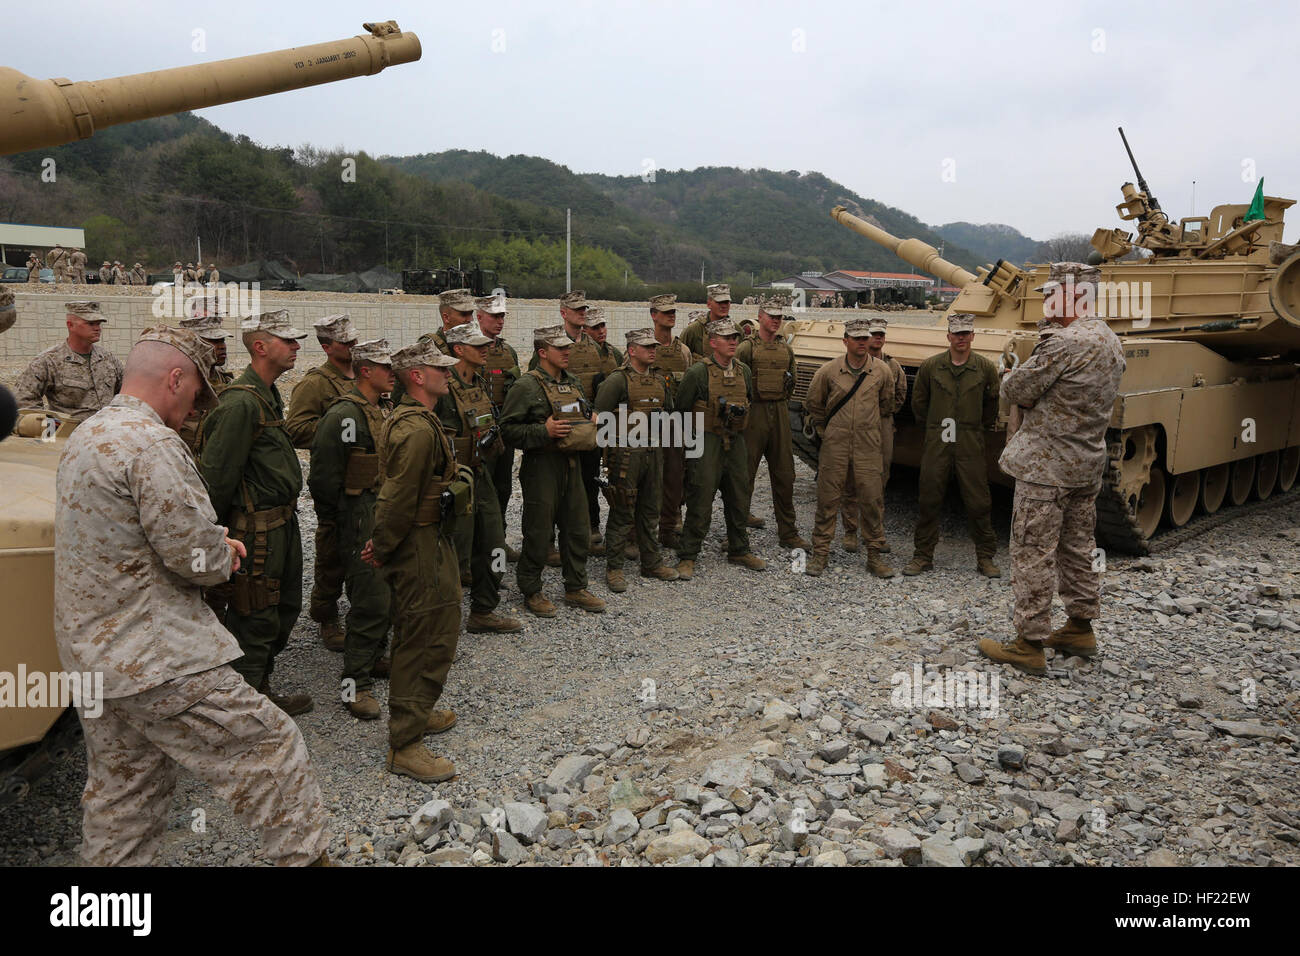 Maj. Gen. James S. Hartsell, Commanding General of 4th Marine Division, gives encouraging words to Marines with Charlie Company, 4th Tanks Battalion, participating in exercise Ssang Yong, Pohang, South Korea,  April 3, 2014. Exercise Ssang Yong is conducted annually in the ROK to enhance interoperability between U.S. and ROK forces by performing a full spectrum of amphibious operations while showcasing sea-based power projection in the Pacific. (U.S. Marine Corps photo by Cpl. Lauren Whitney/Released) 4th Marine Division leaders visit, Ssang Yong 14 140403-M-GZ082-041 Stock Photo